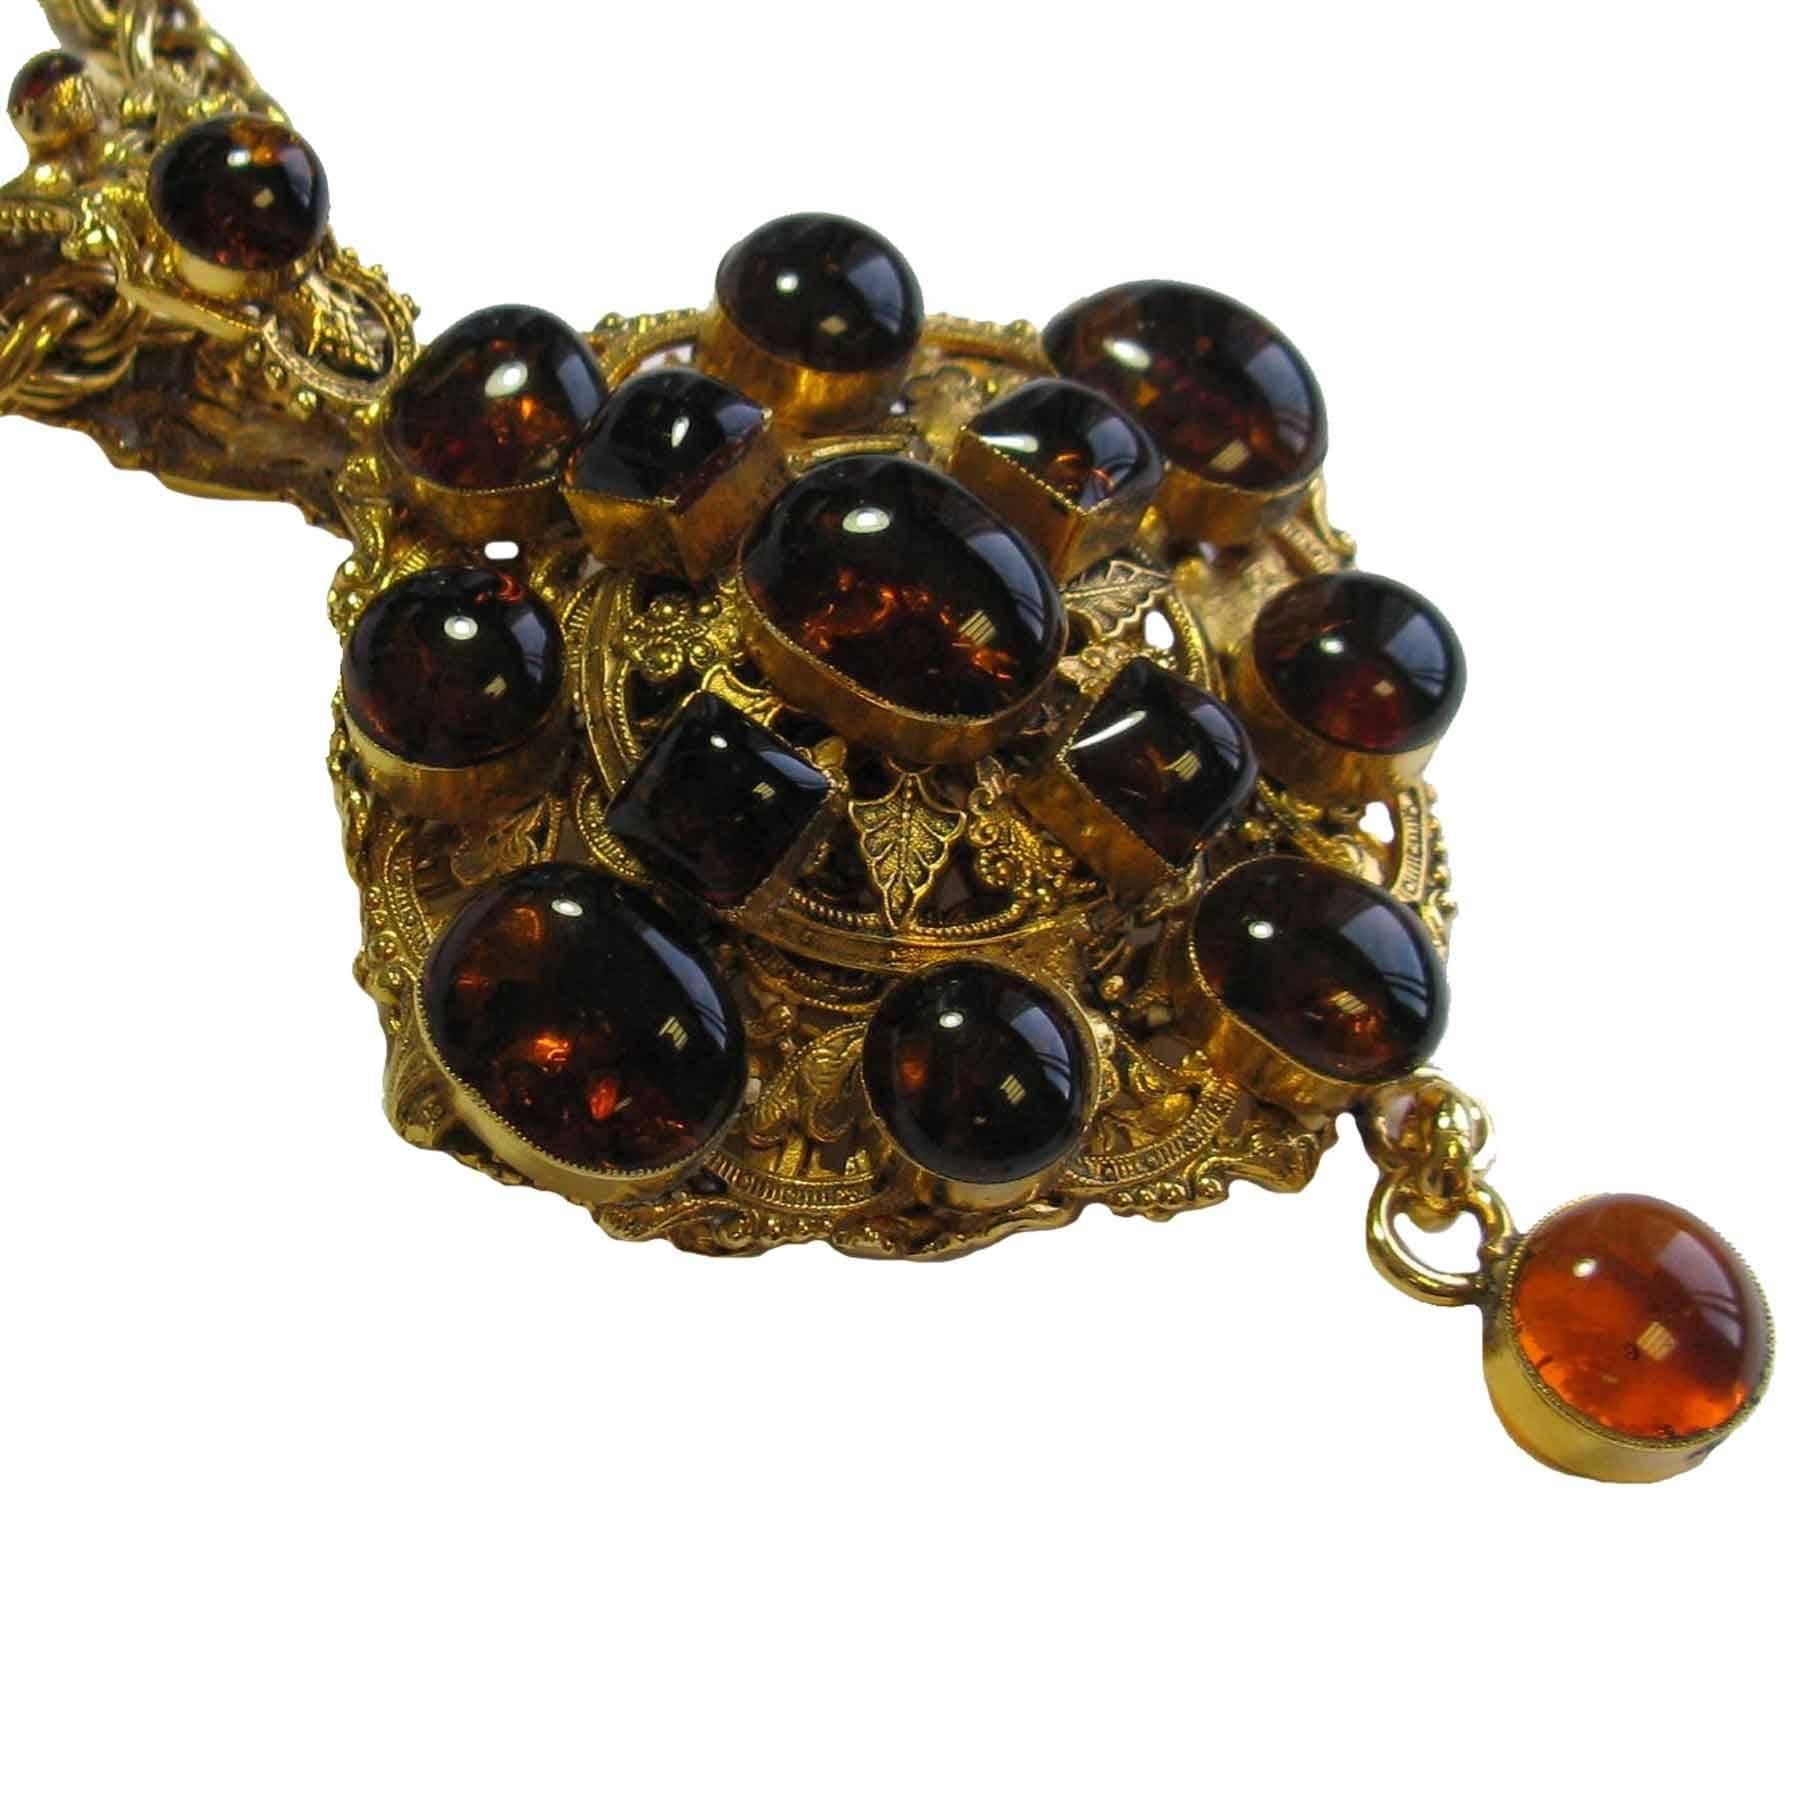 MARGUERITE DE VALOIS Necklace in Gilded Metal and Pendant in Topaze Molten Glass 1